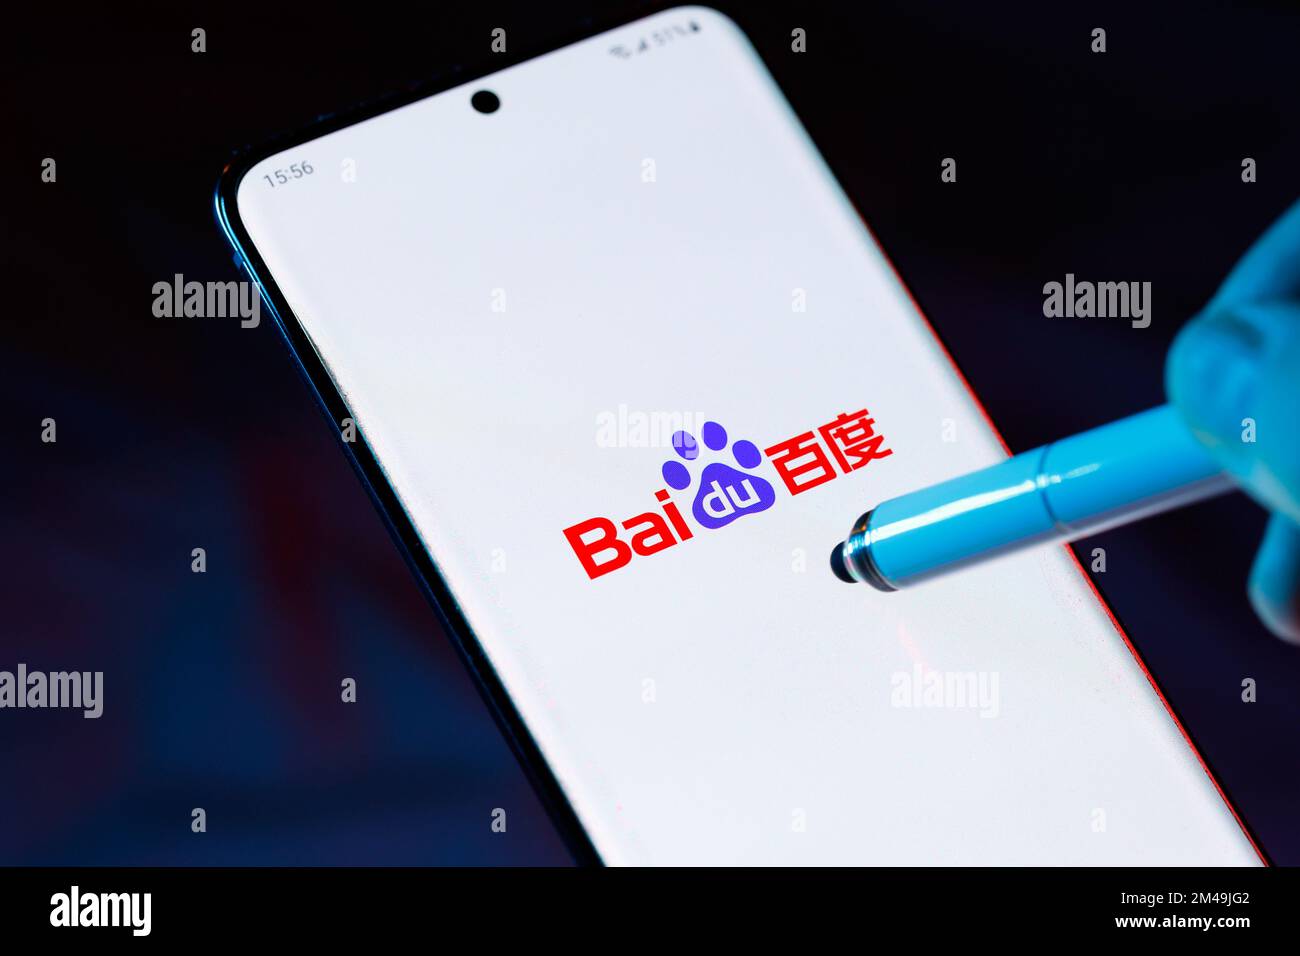 Logo of Baidu 百度 on a smartphone with a stylus pointing at the screen. Baidu is a Chinese Internet and AI tech company. Stock Photo